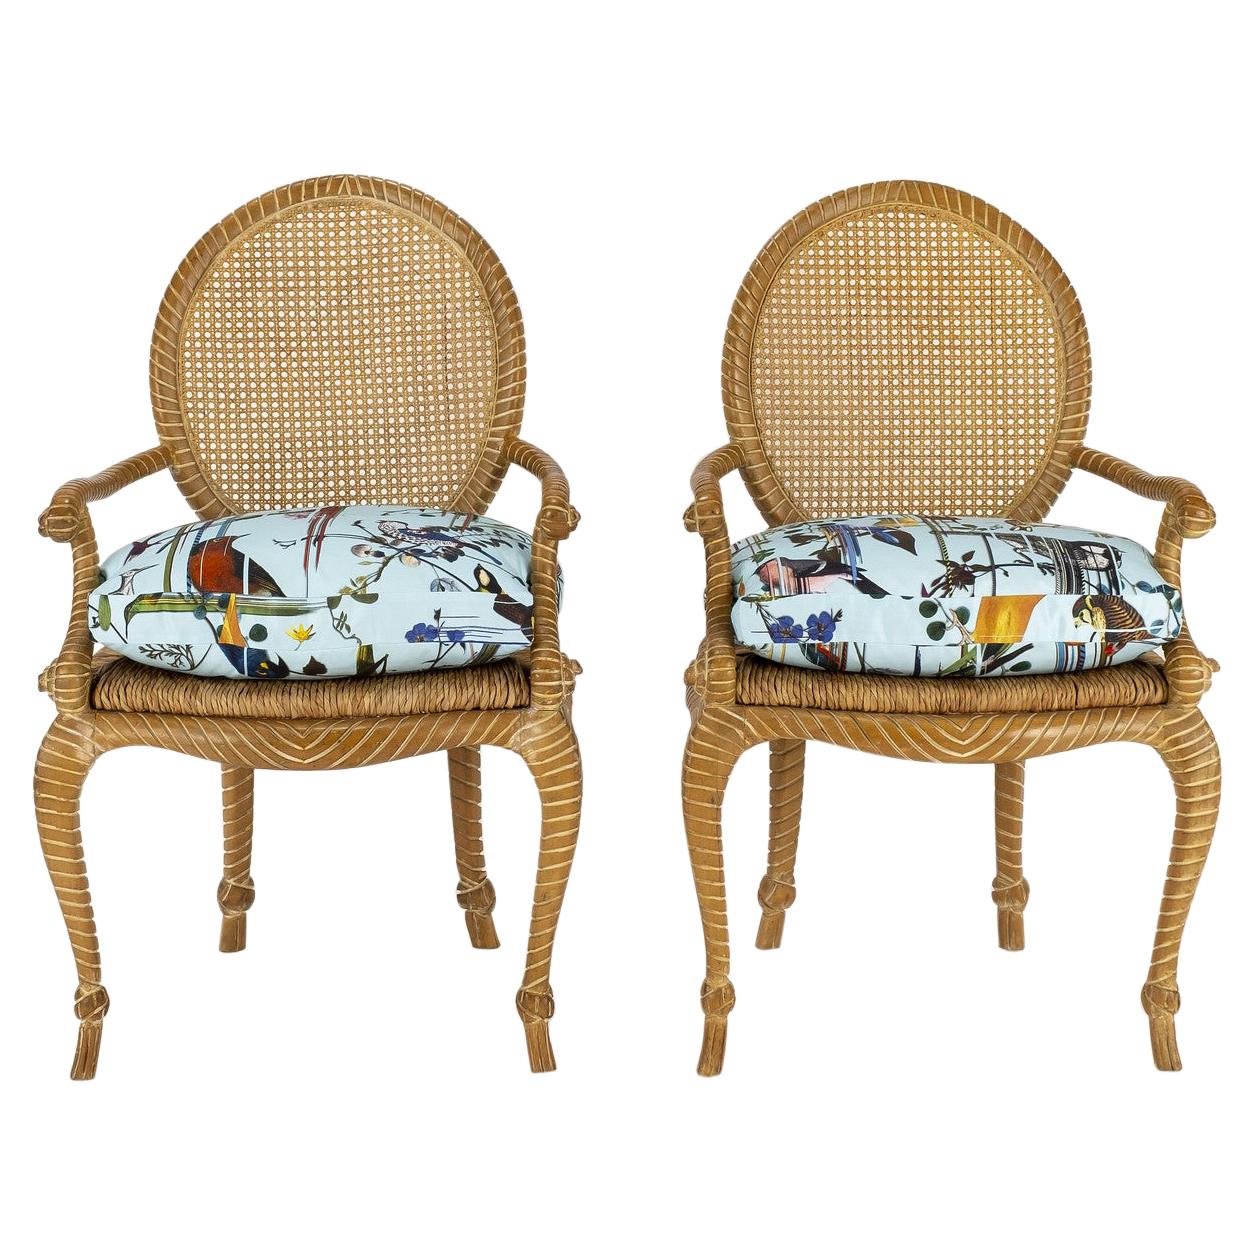 Pair of Fournier Style Rope Armchairs with Christian LaCroix Bird Seat Cushions